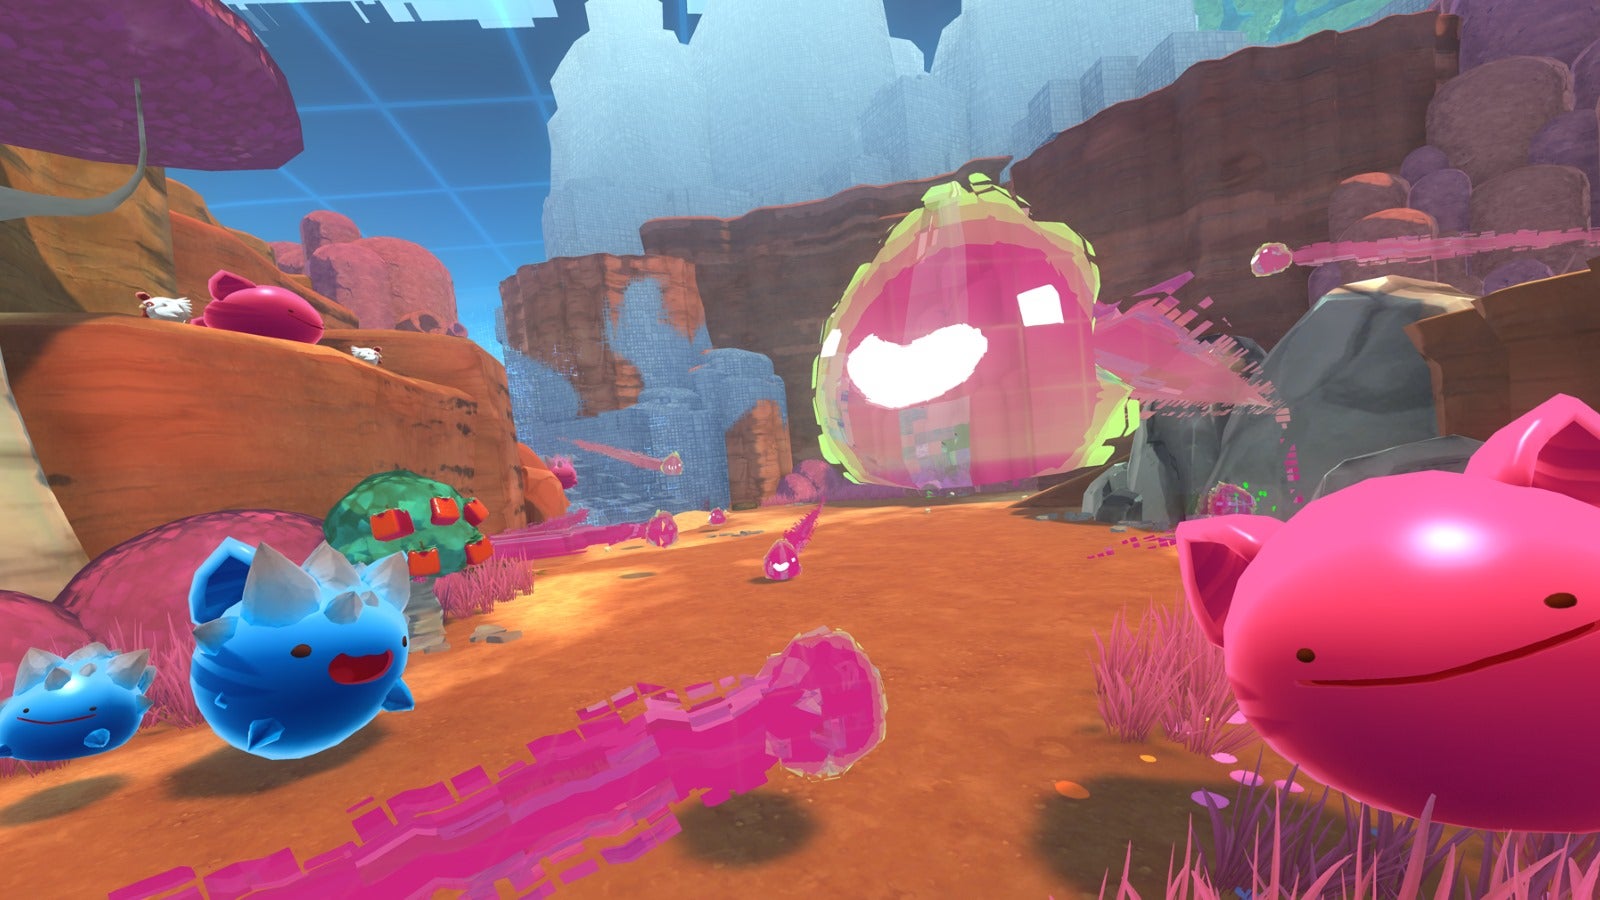 Slime Rancher expands for free into the jiggly glitch dimension.